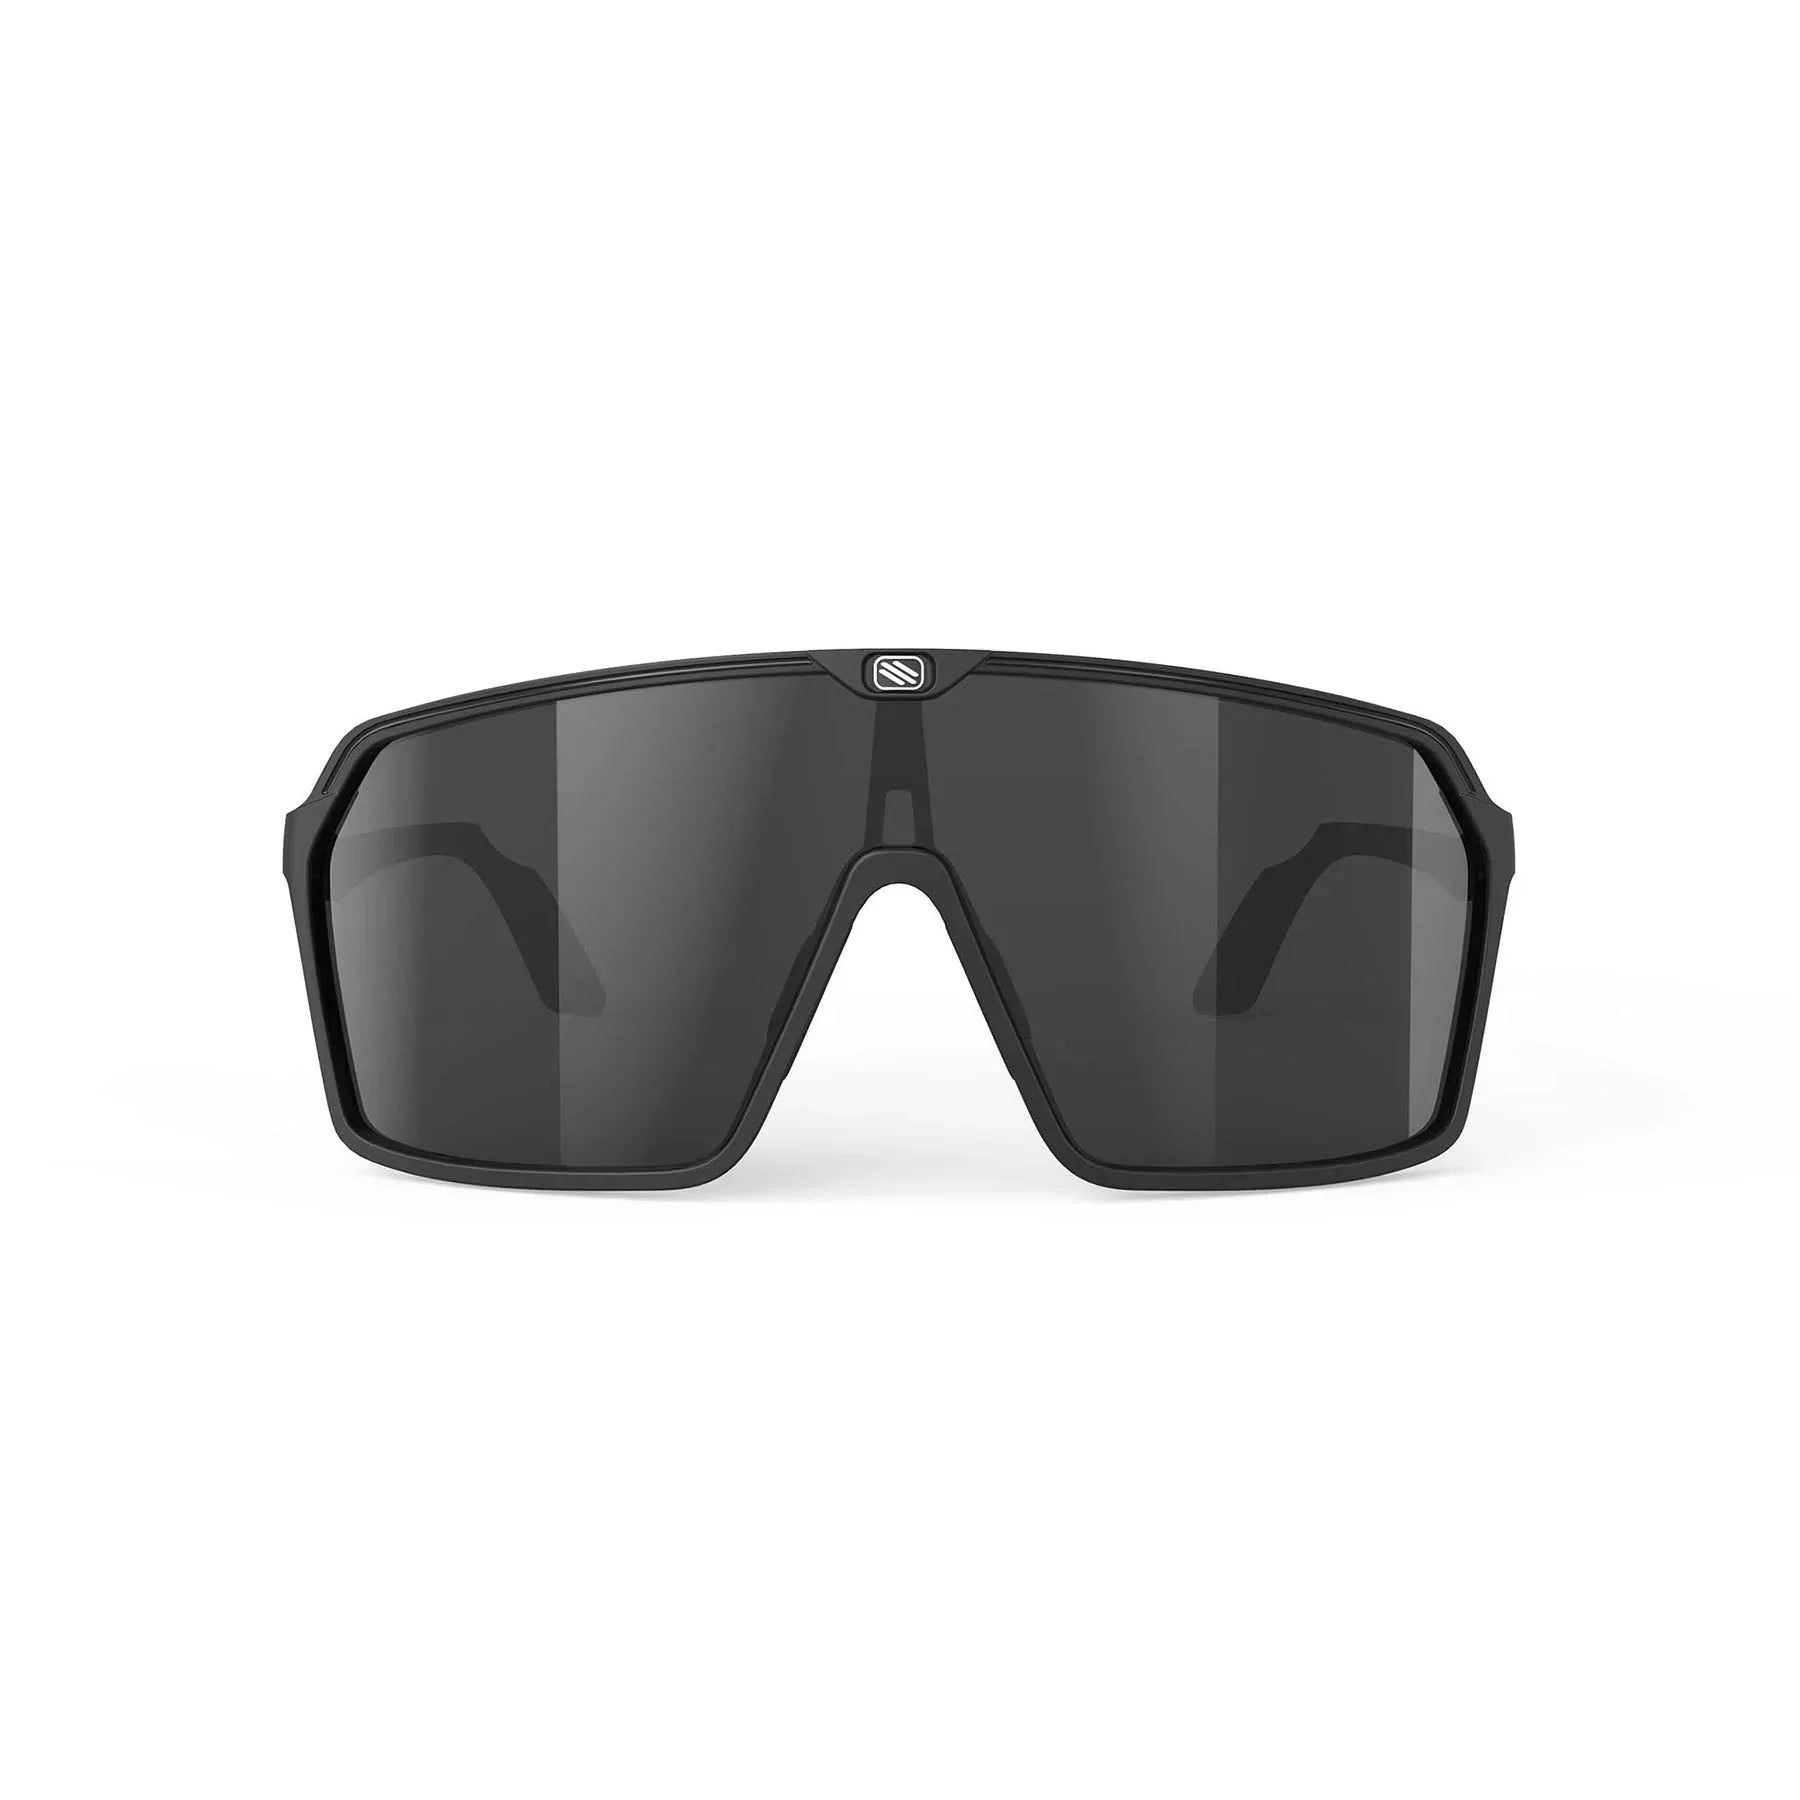 Rudy Project Spinshield running and cycling sunglasses#color_spinshield-matte-black-with-smoke-black-lenses